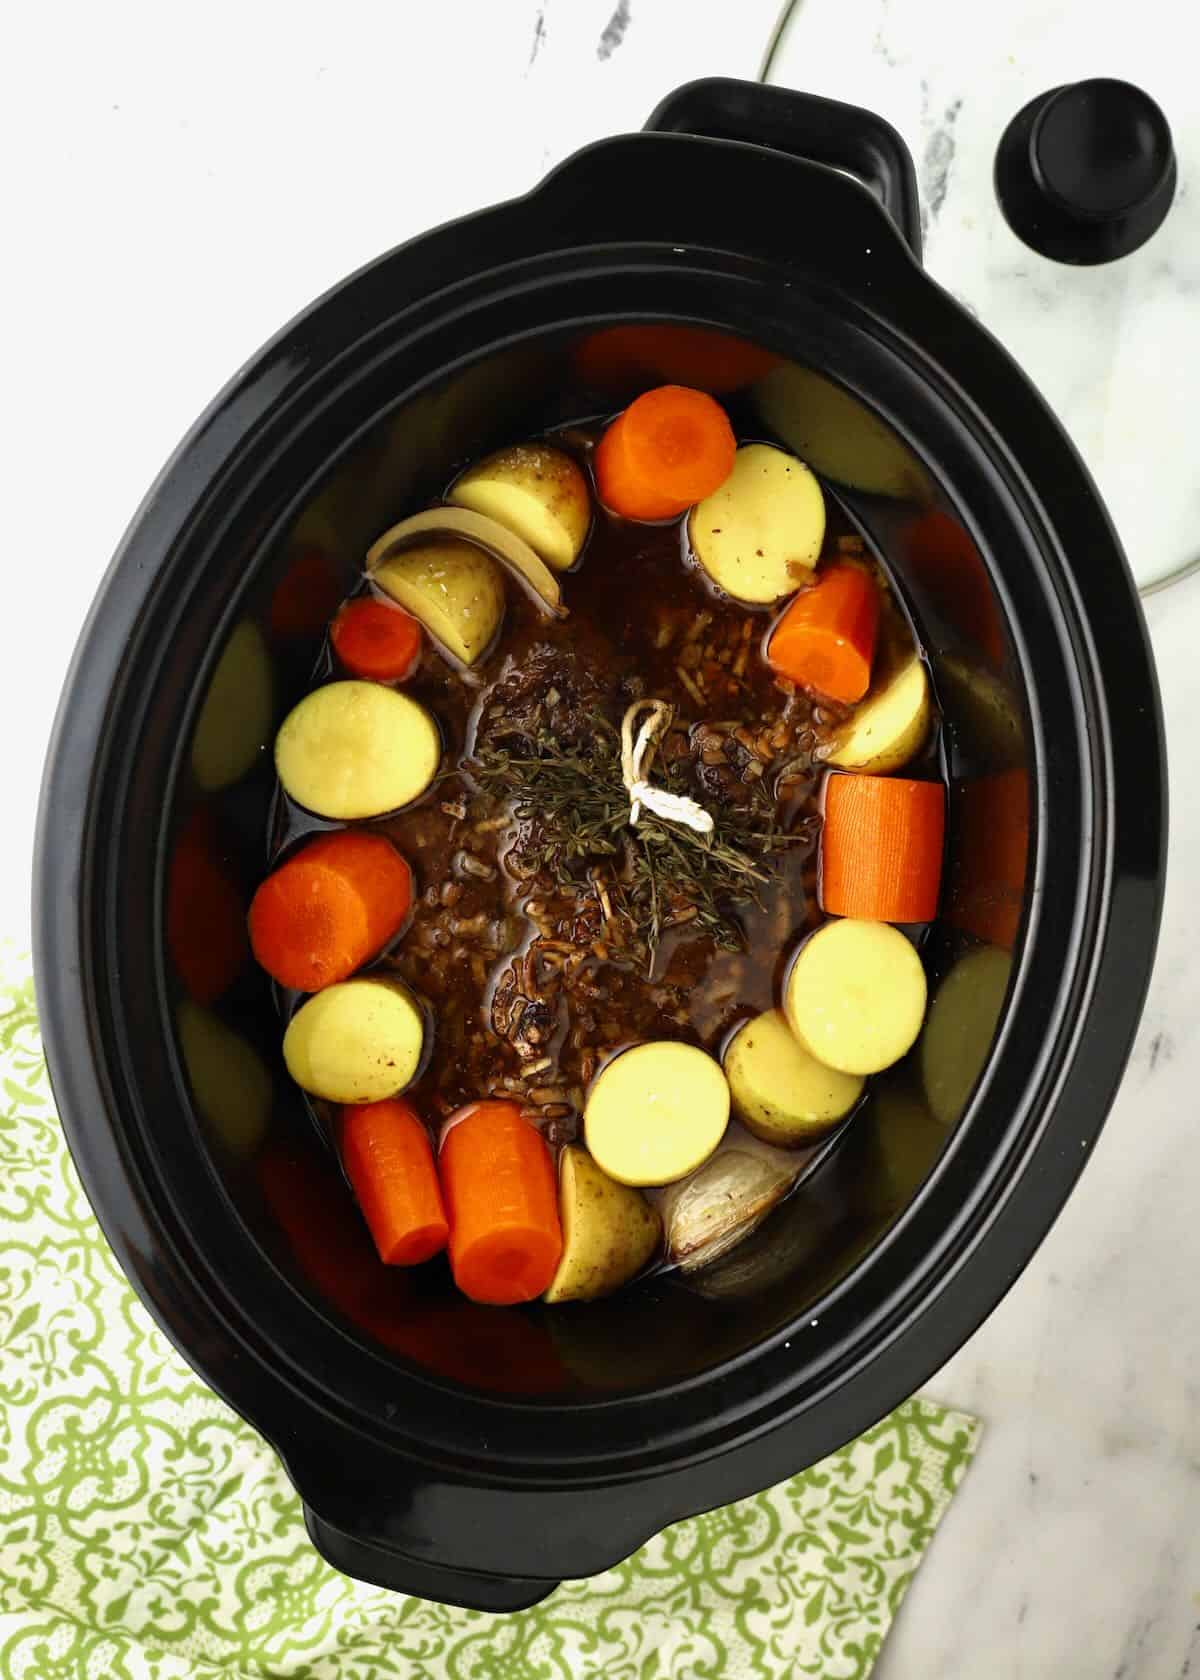 A chuck roast surrounded with potatoes and carrots in a Crock-Pot.